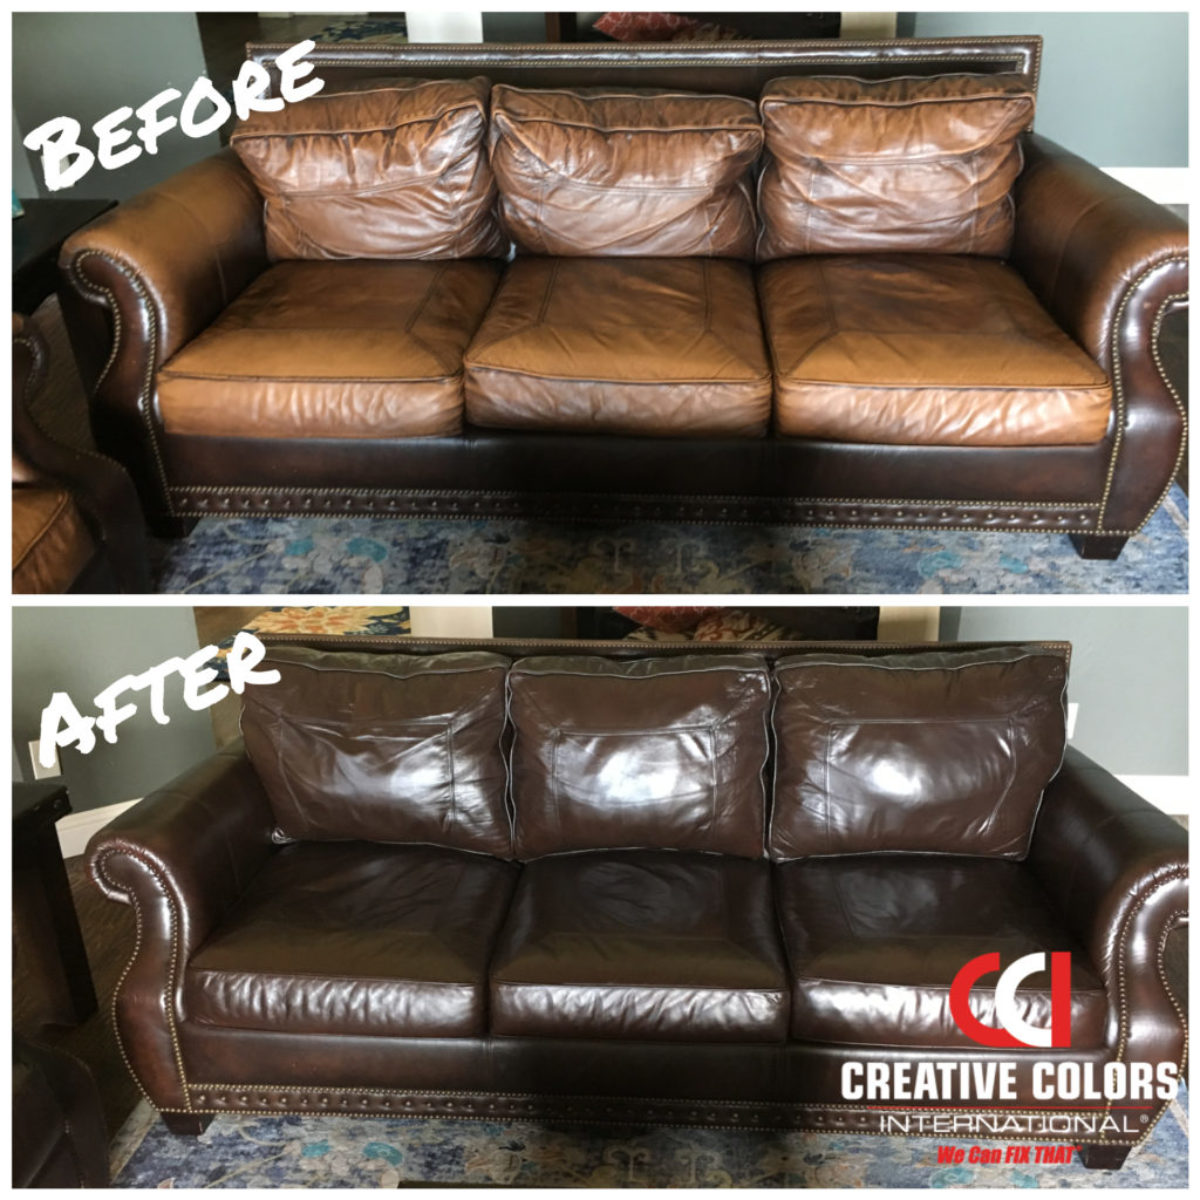 Why Not to Use a Leather Sofa Repair Kit